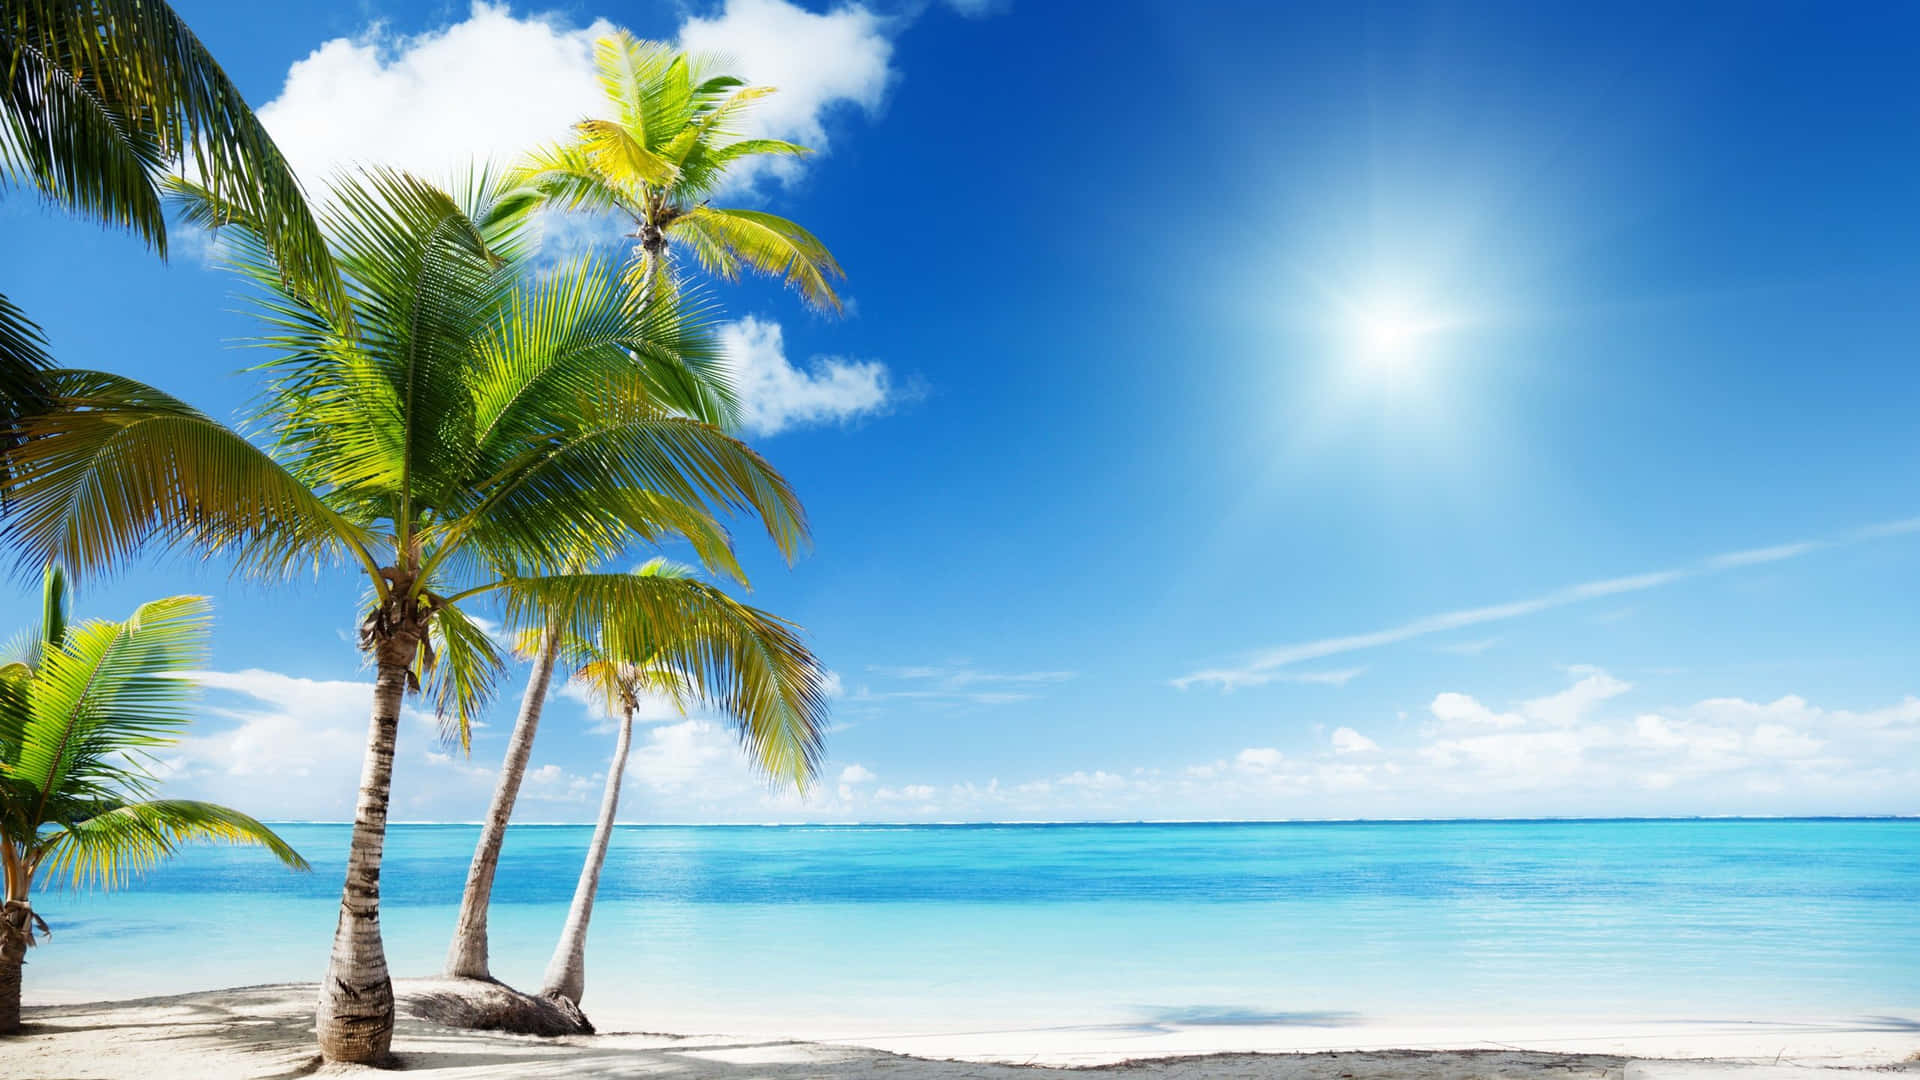 Take in the serenity of a tropical beach paradise Wallpaper